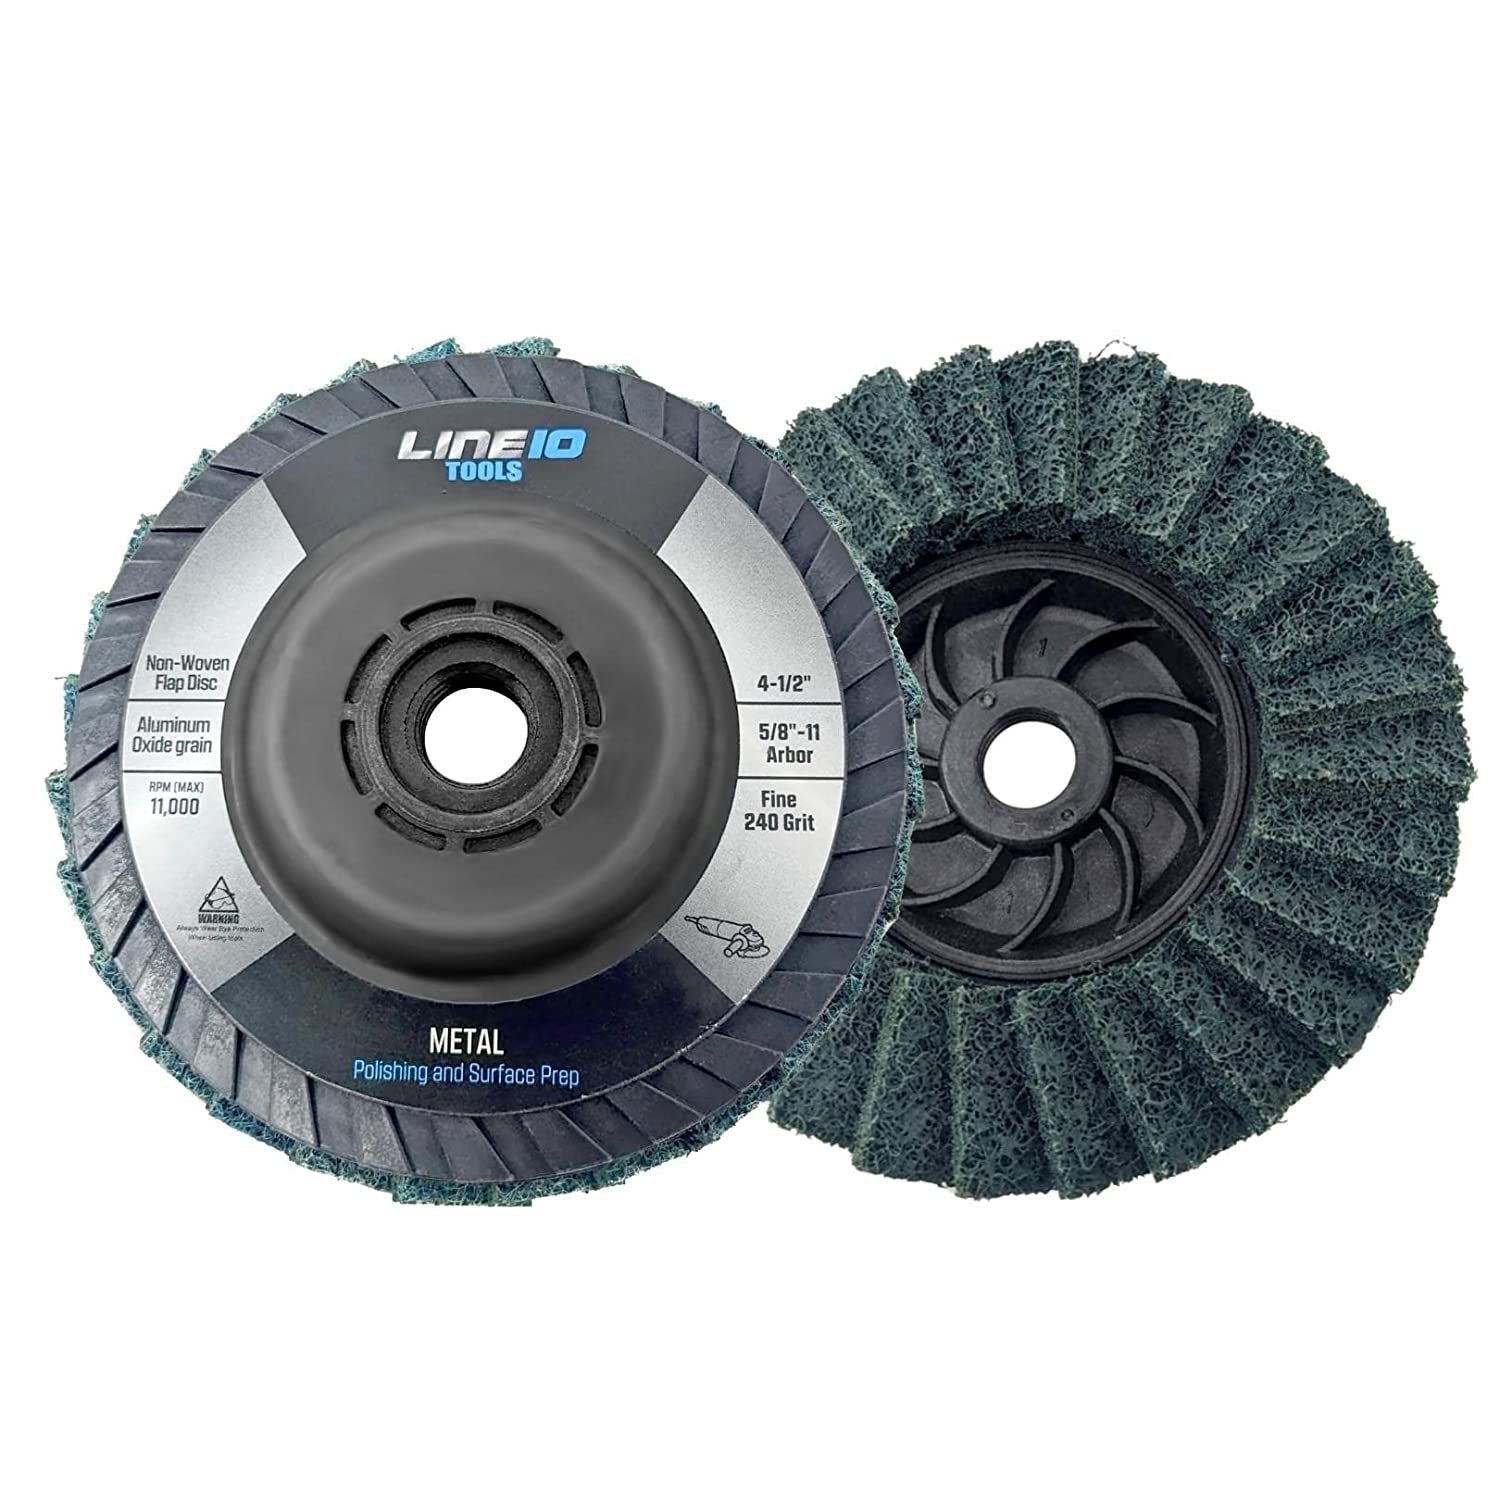 5pk Green Non-Woven Abrasive Flap Disc 4-1/2" with 5/8-11 Threaded Arbor for Angle Grinder